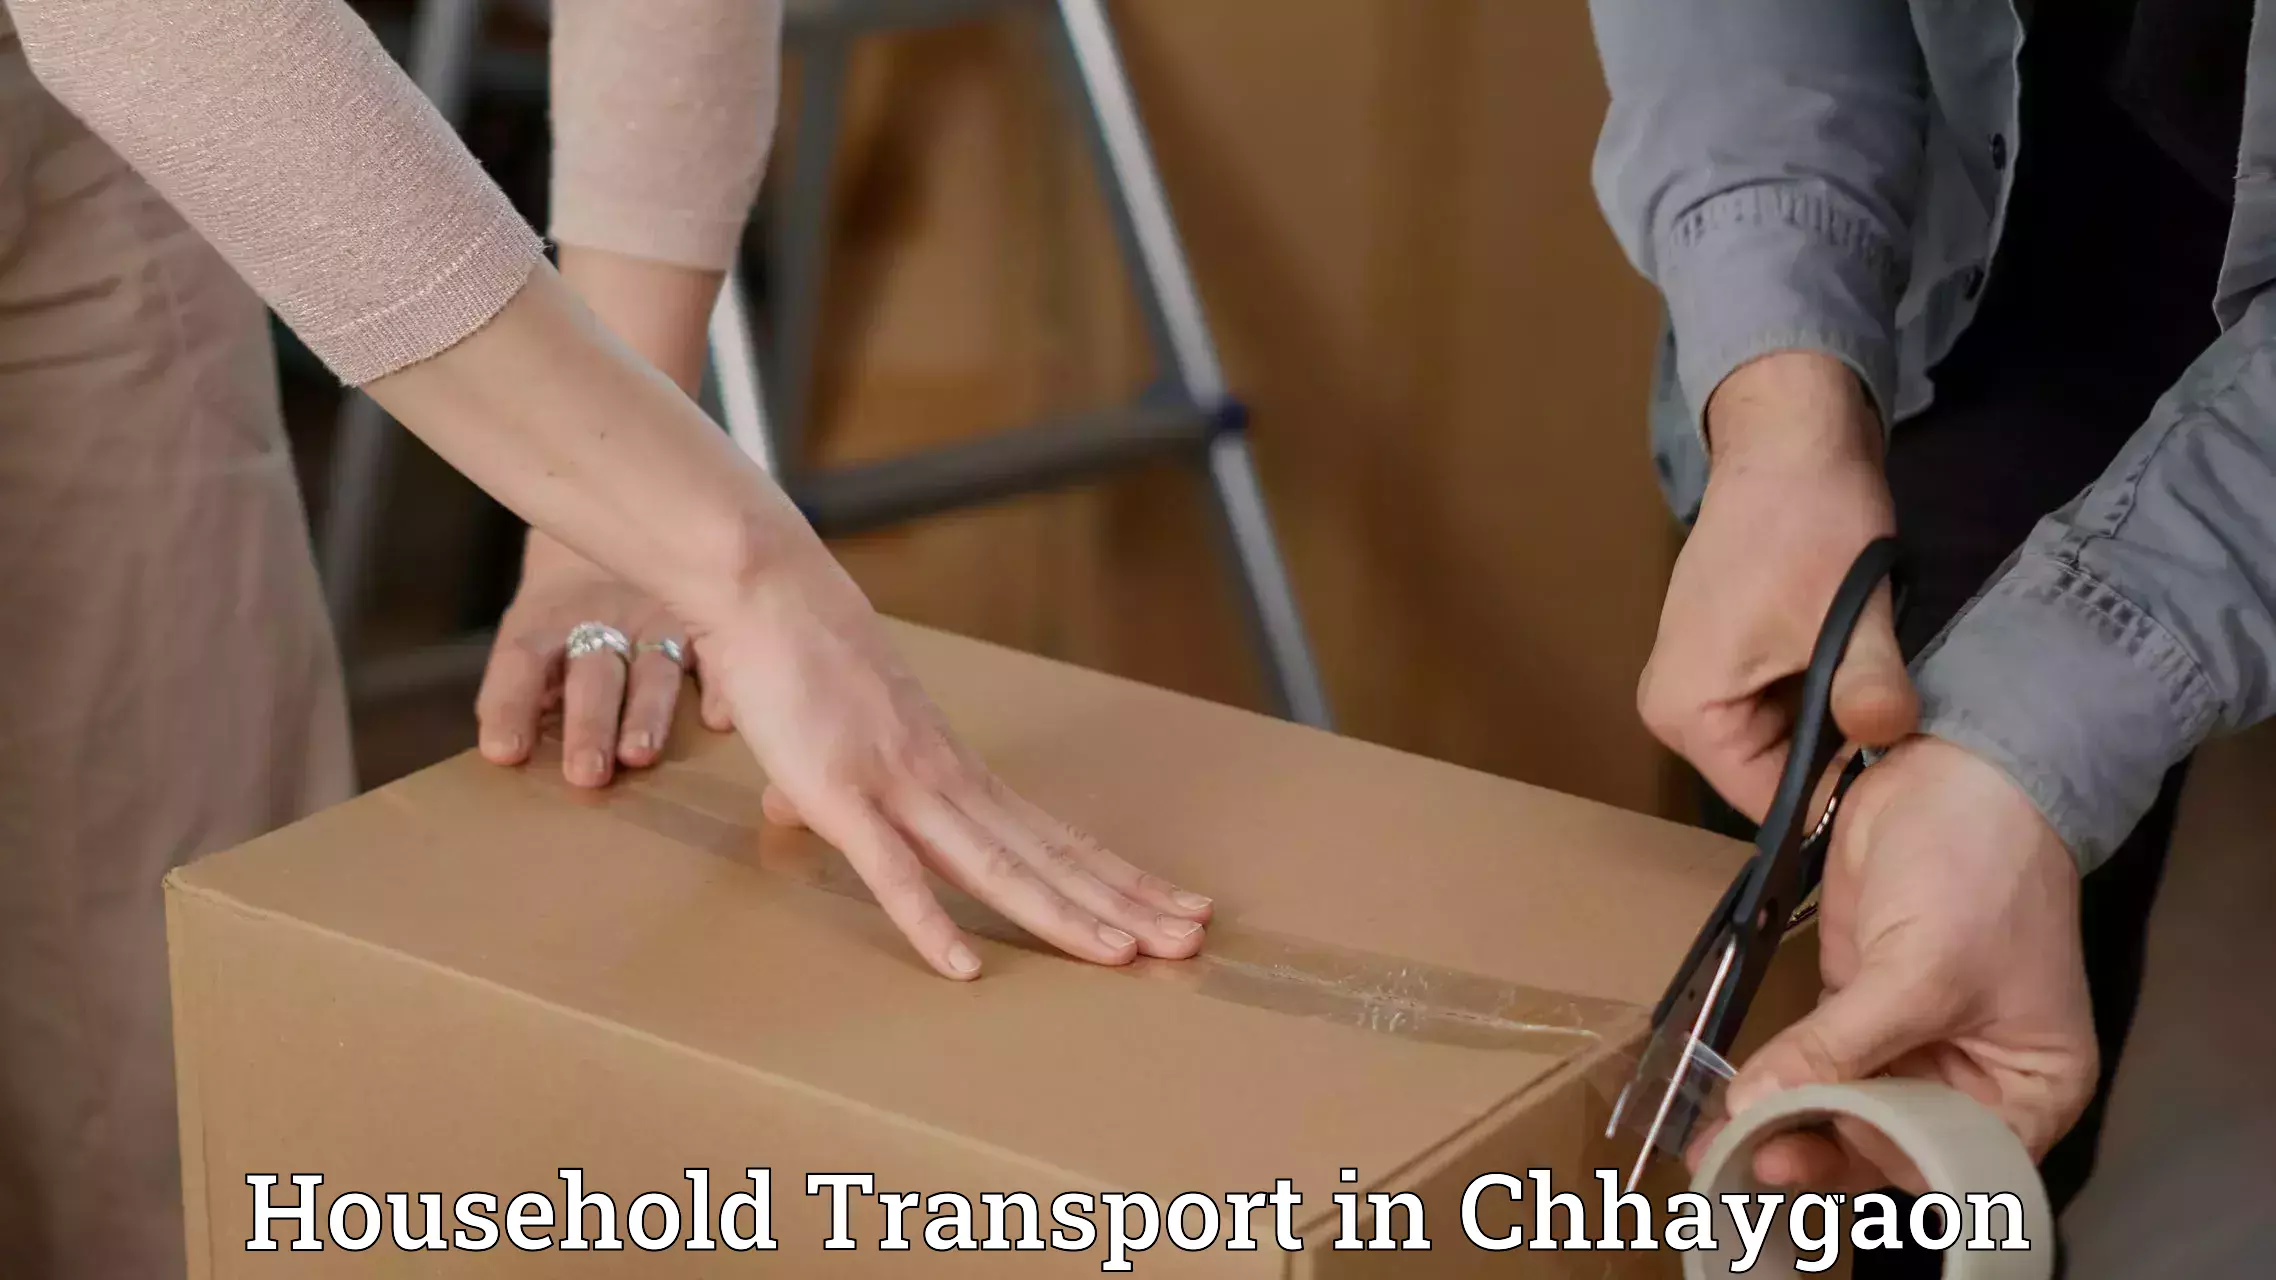 Furniture moving specialists in Chhaygaon